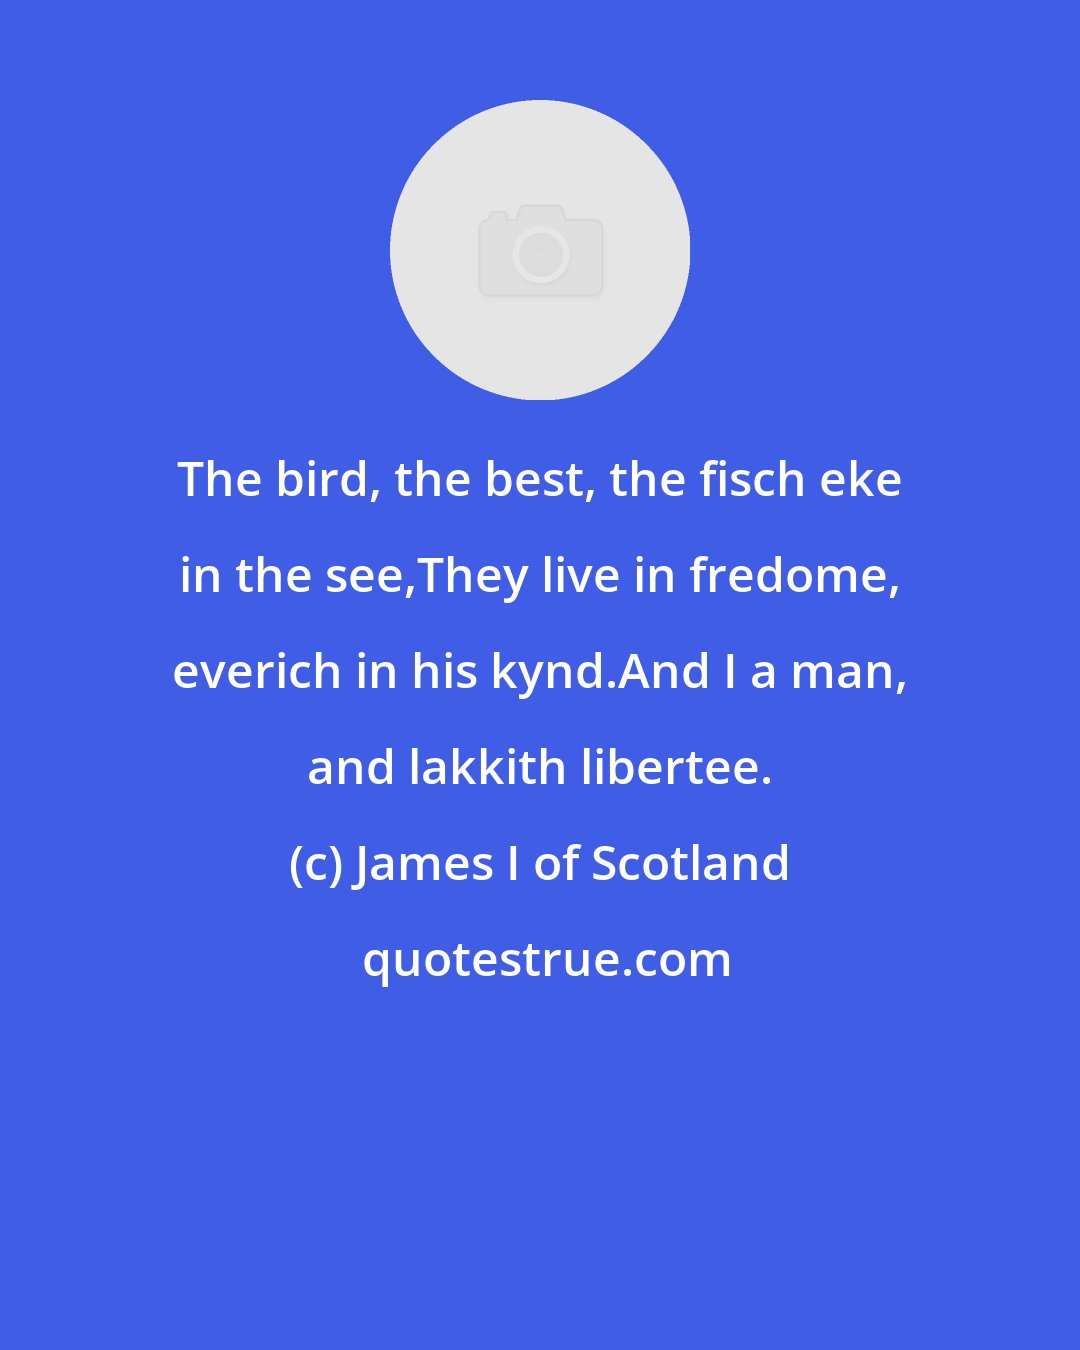 James I of Scotland: The bird, the best, the fisch eke in the see,They live in fredome, everich in his kynd.And I a man, and lakkith libertee.